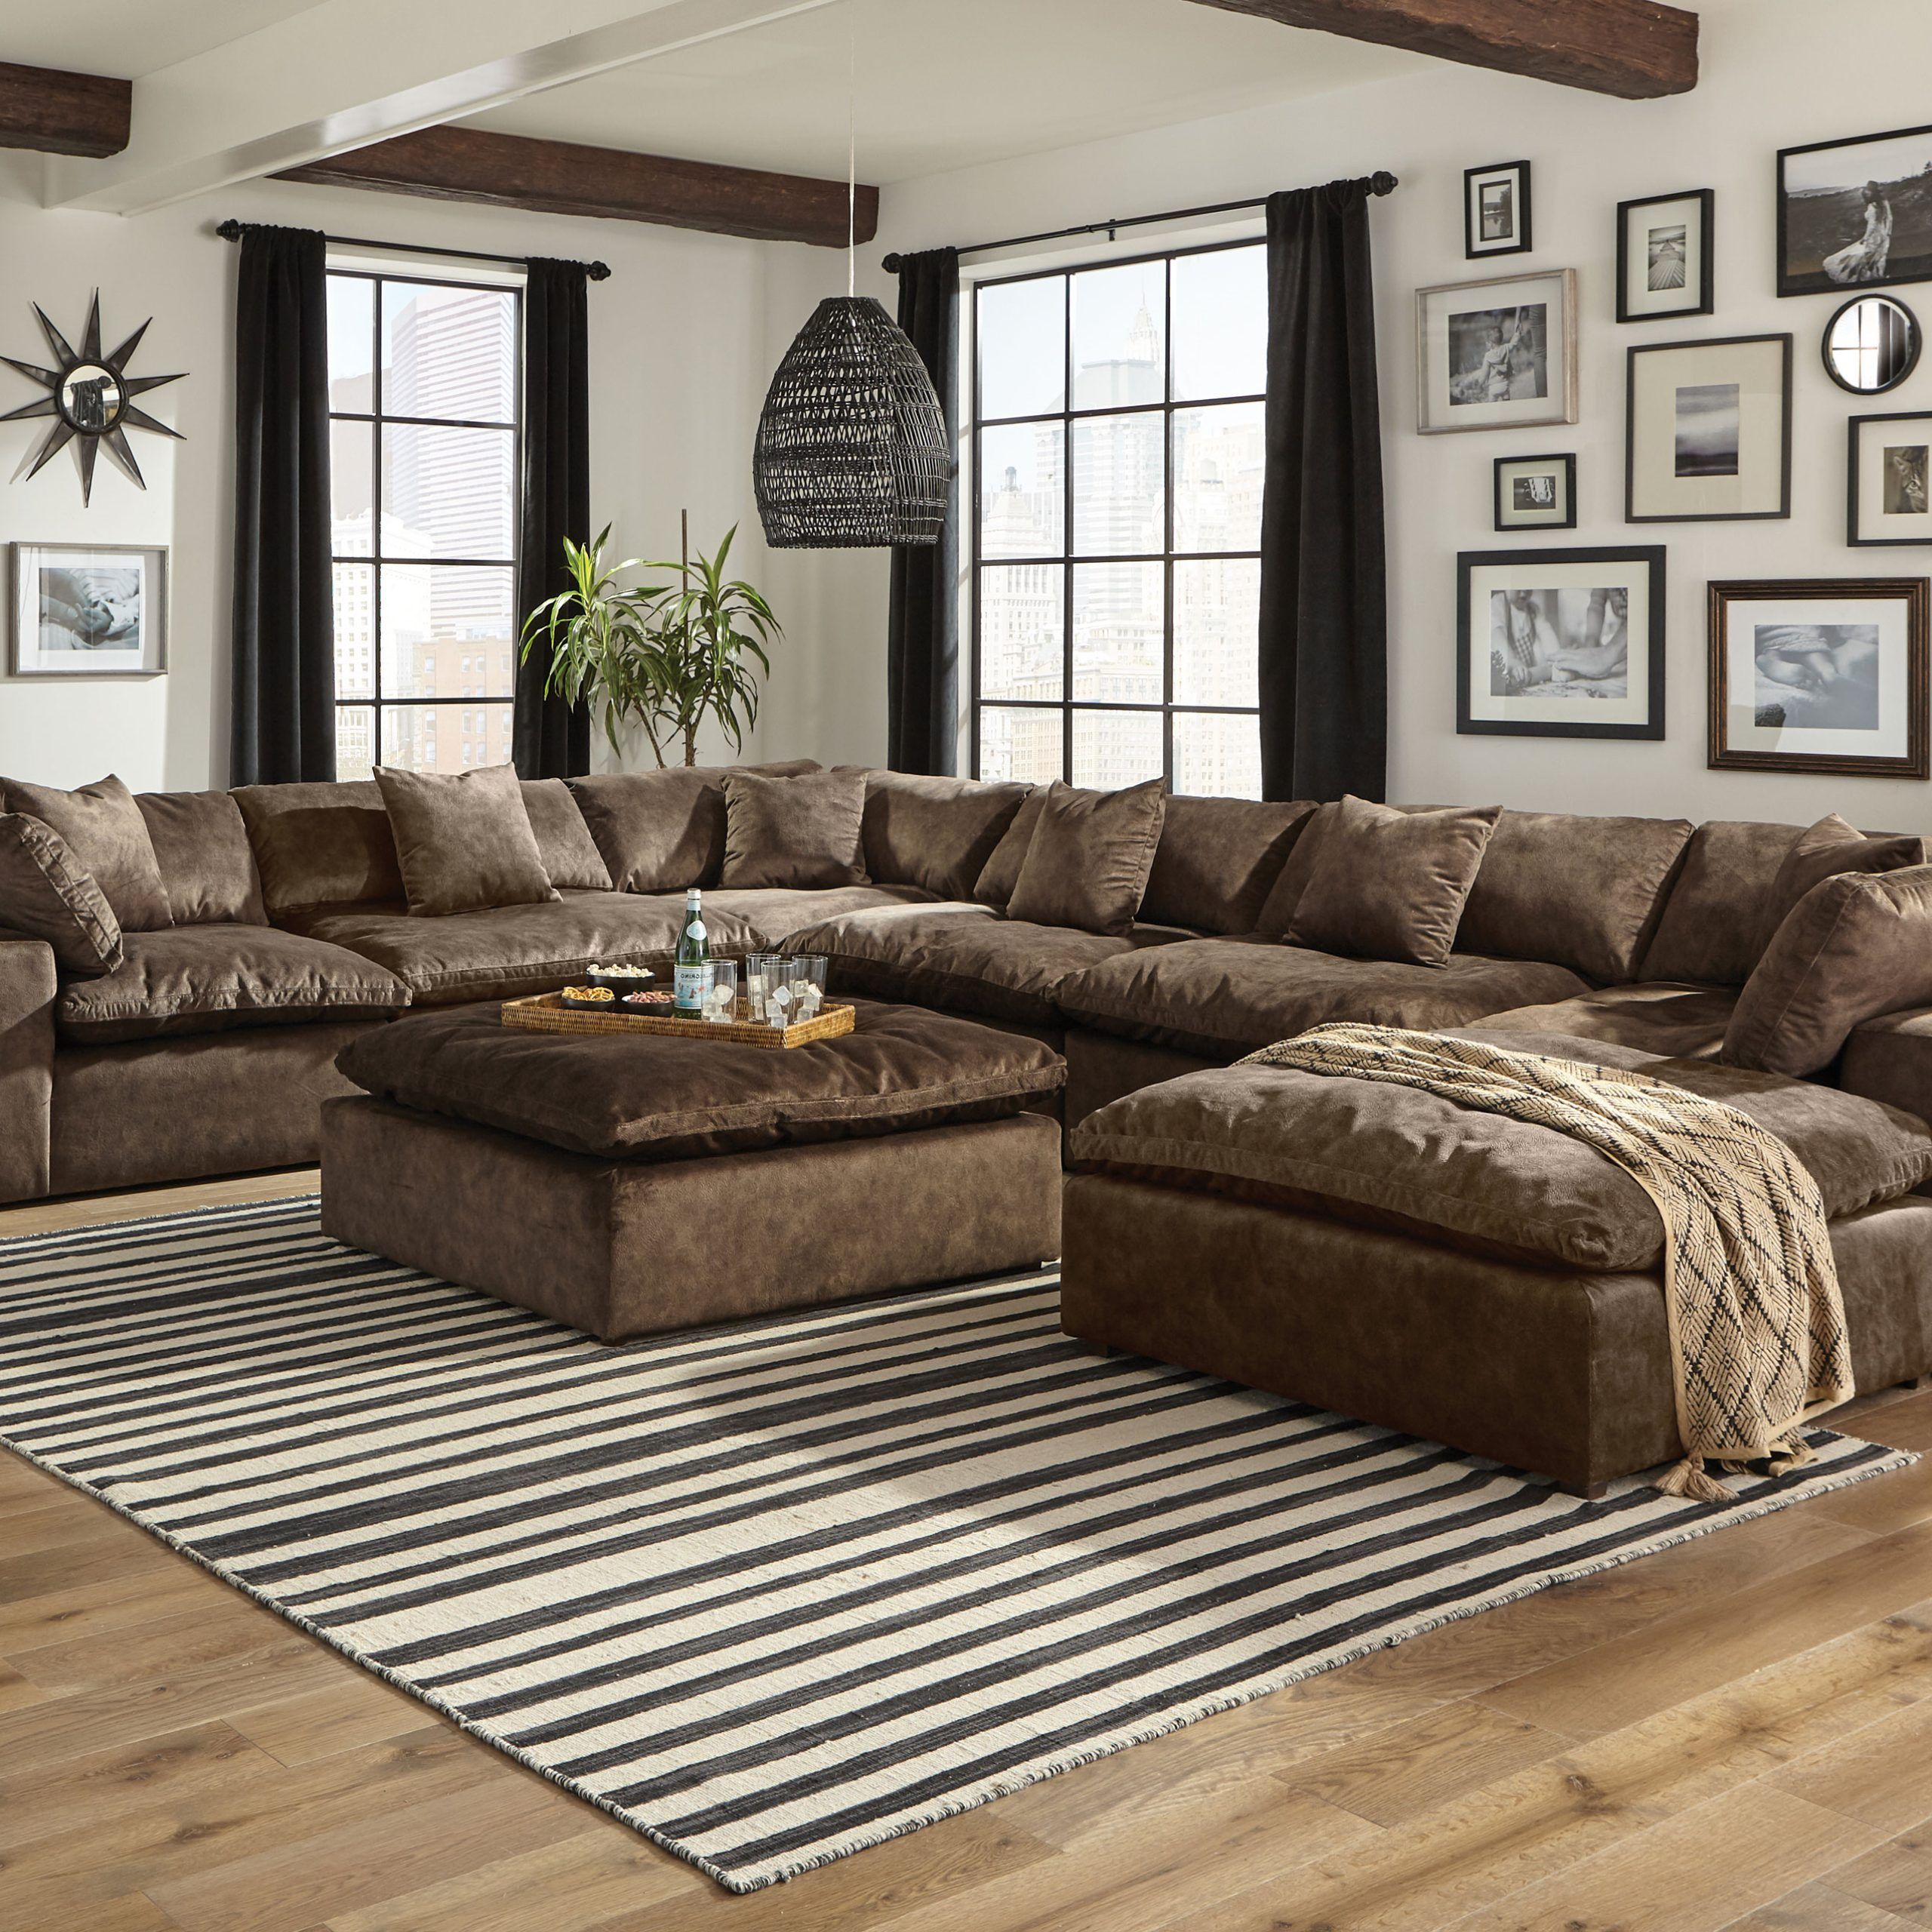 Oversized Modular Sectional Sofa – Latest Sofa Pictures In 110" Oversized Sofas (View 7 of 20)